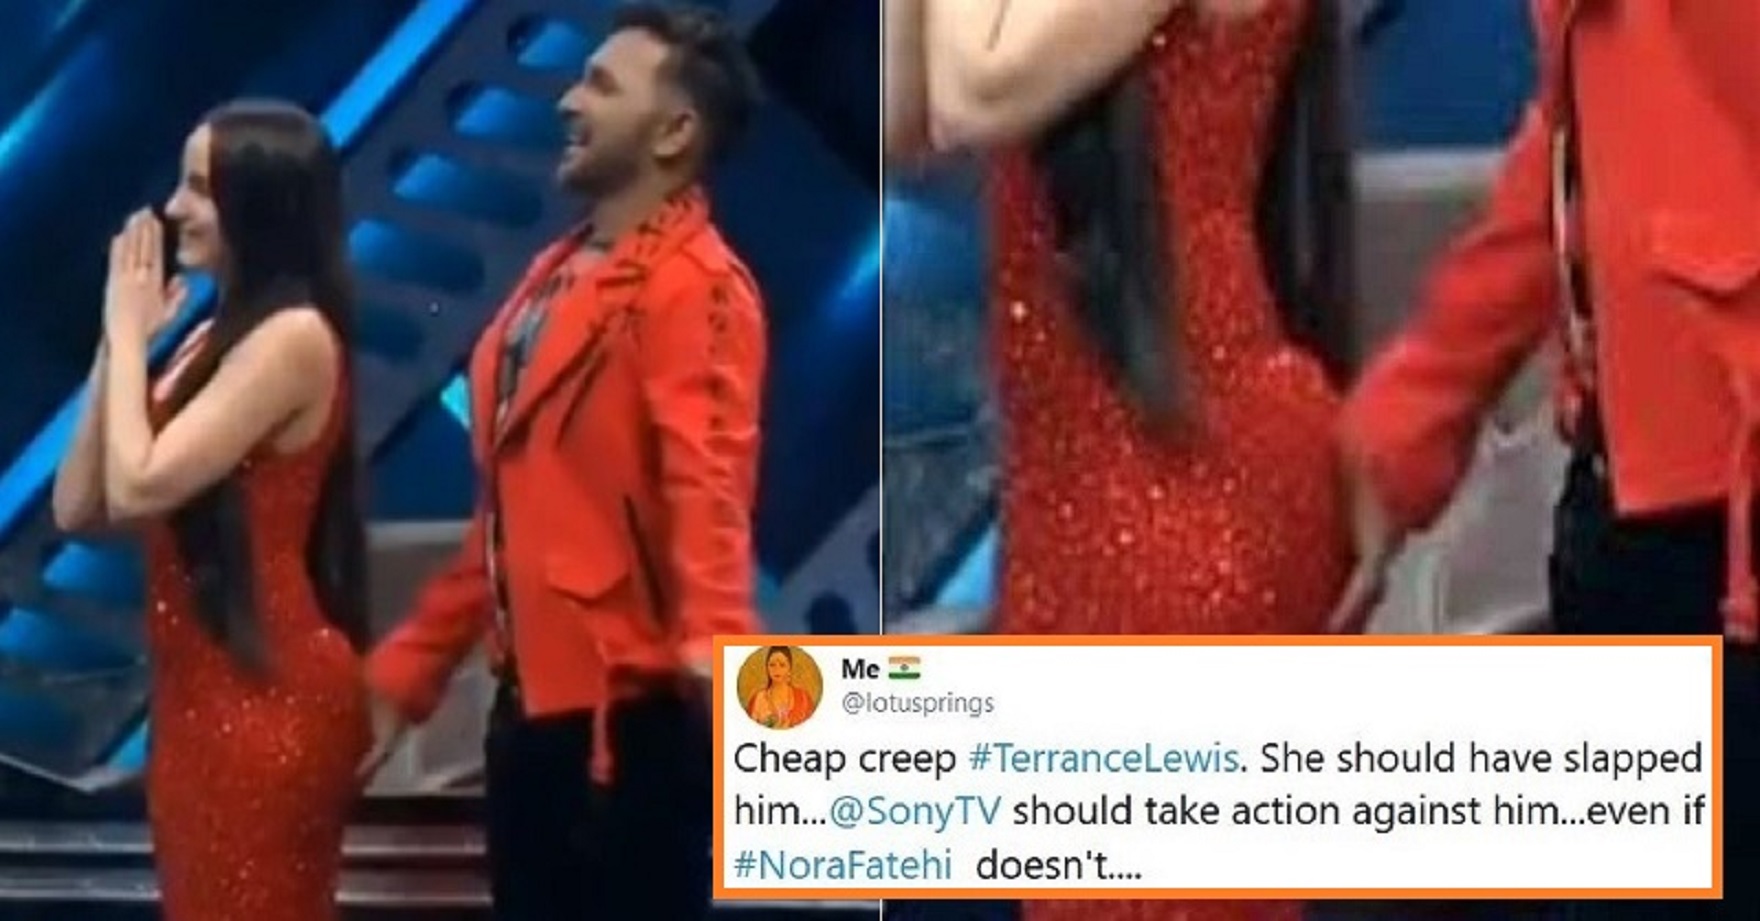 Terence Lewis Called Out By Internet For Allegedly Inappropriately Touching Norah Fatehi on Dance Reality Show